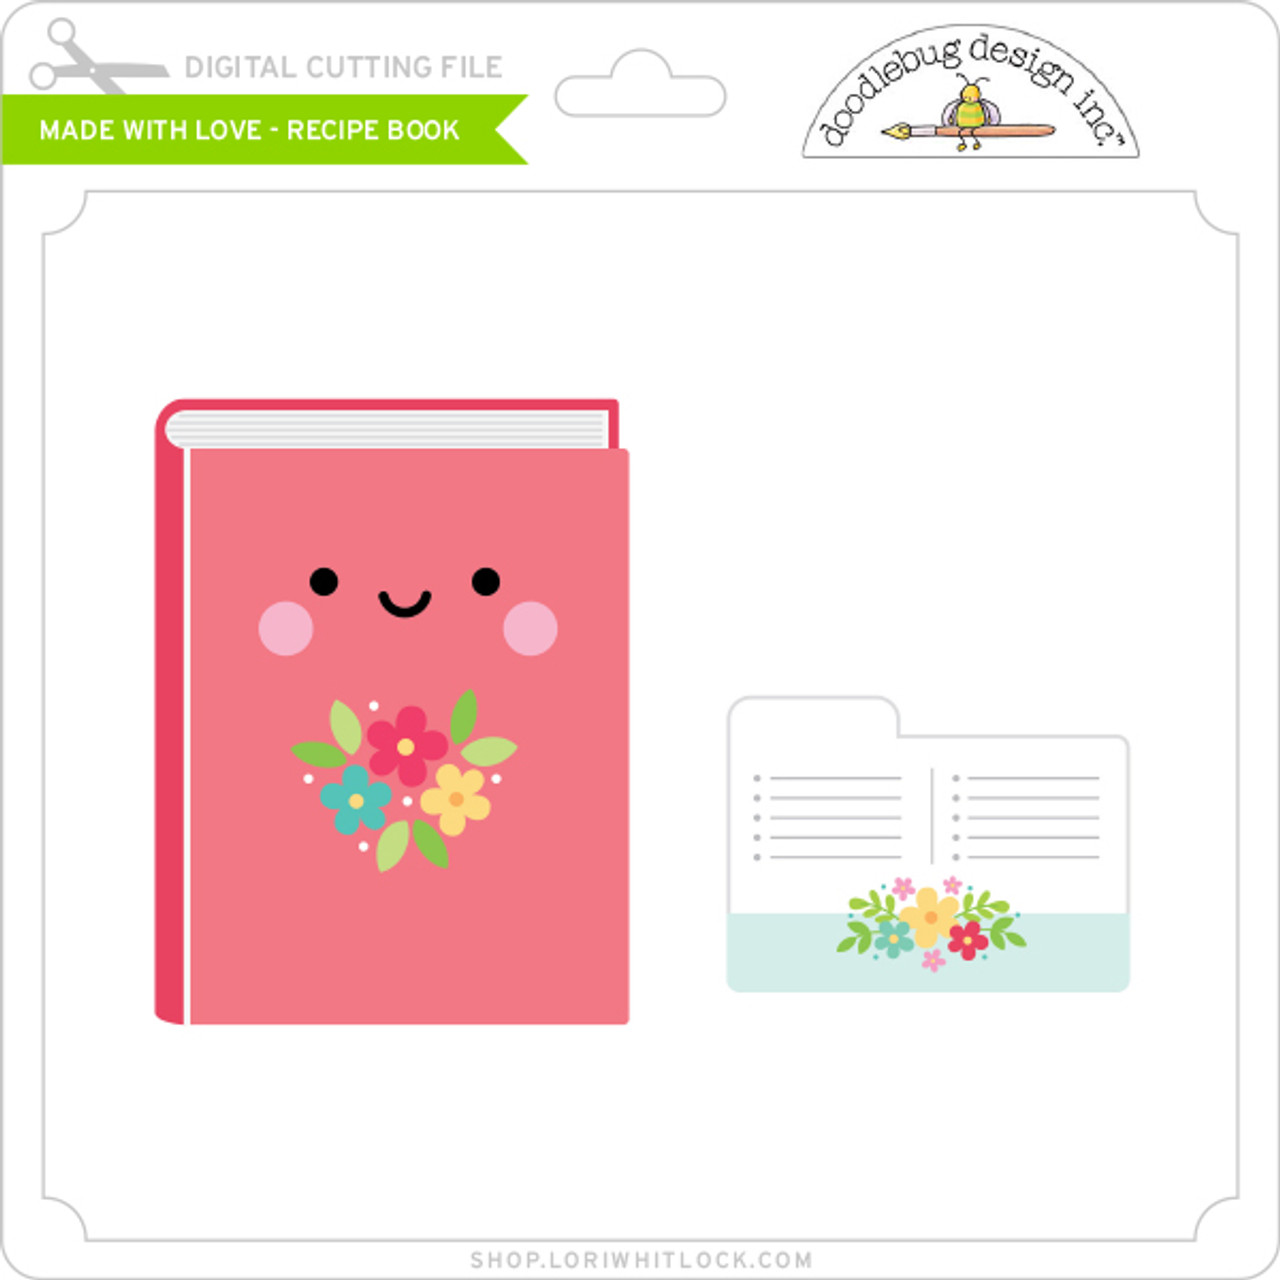 Made with Love - Recipe Book - Lori Whitlock's SVG Shop